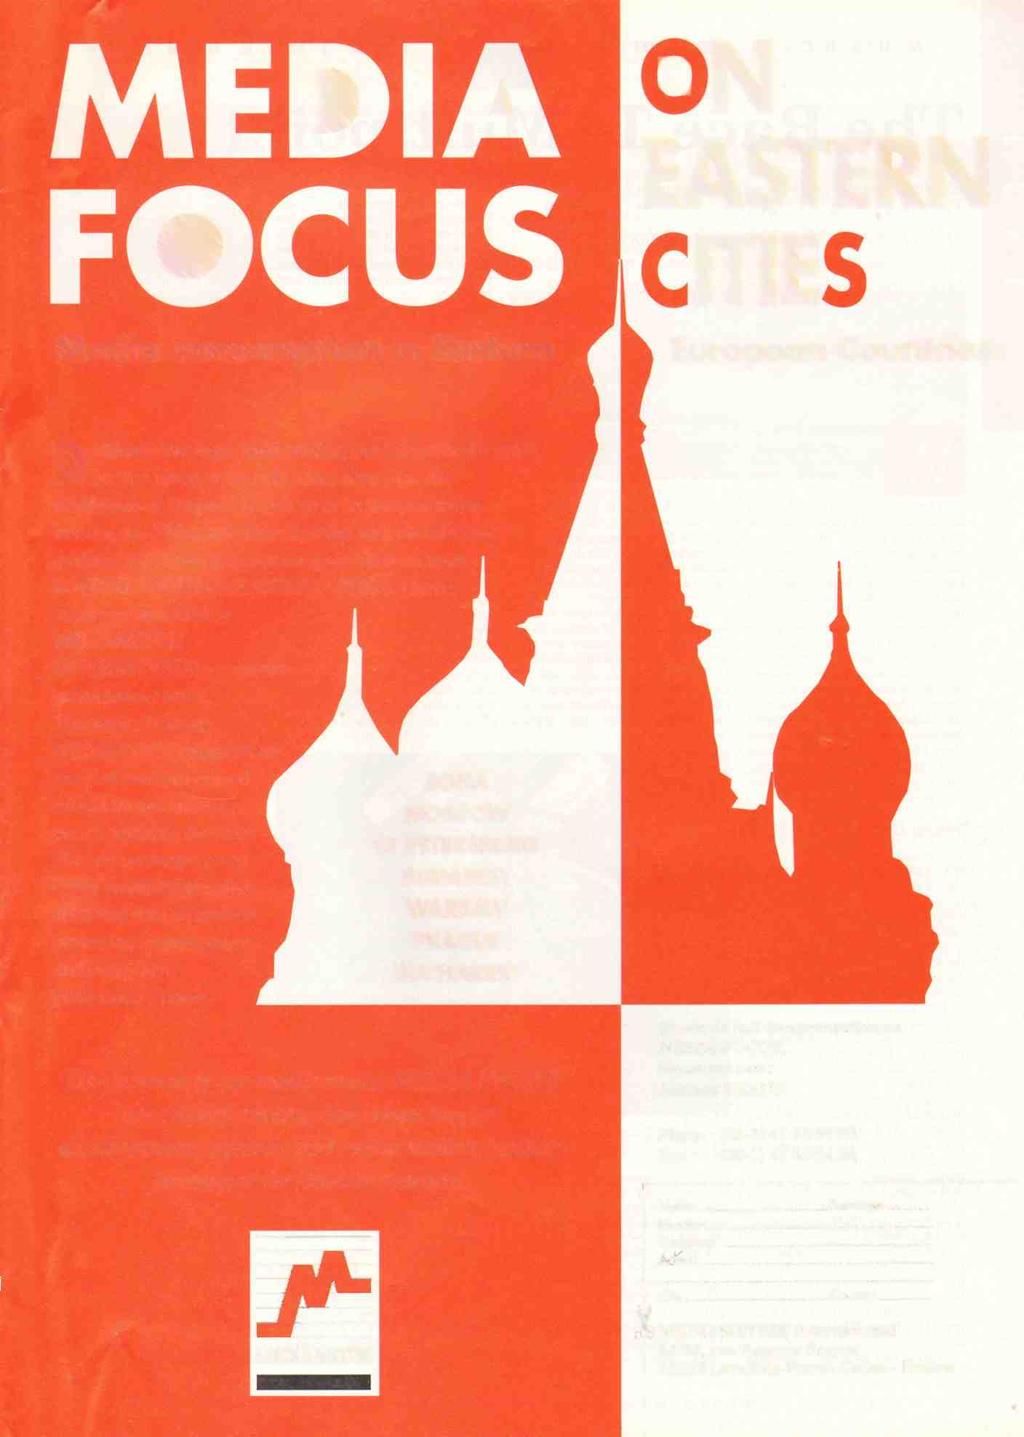 AmericanRadioHistory.Com IVIED A FOCUS Media consumption in Eastern ON EASTERN CITIES European Countries Do Muscovites begin their working day before the French?